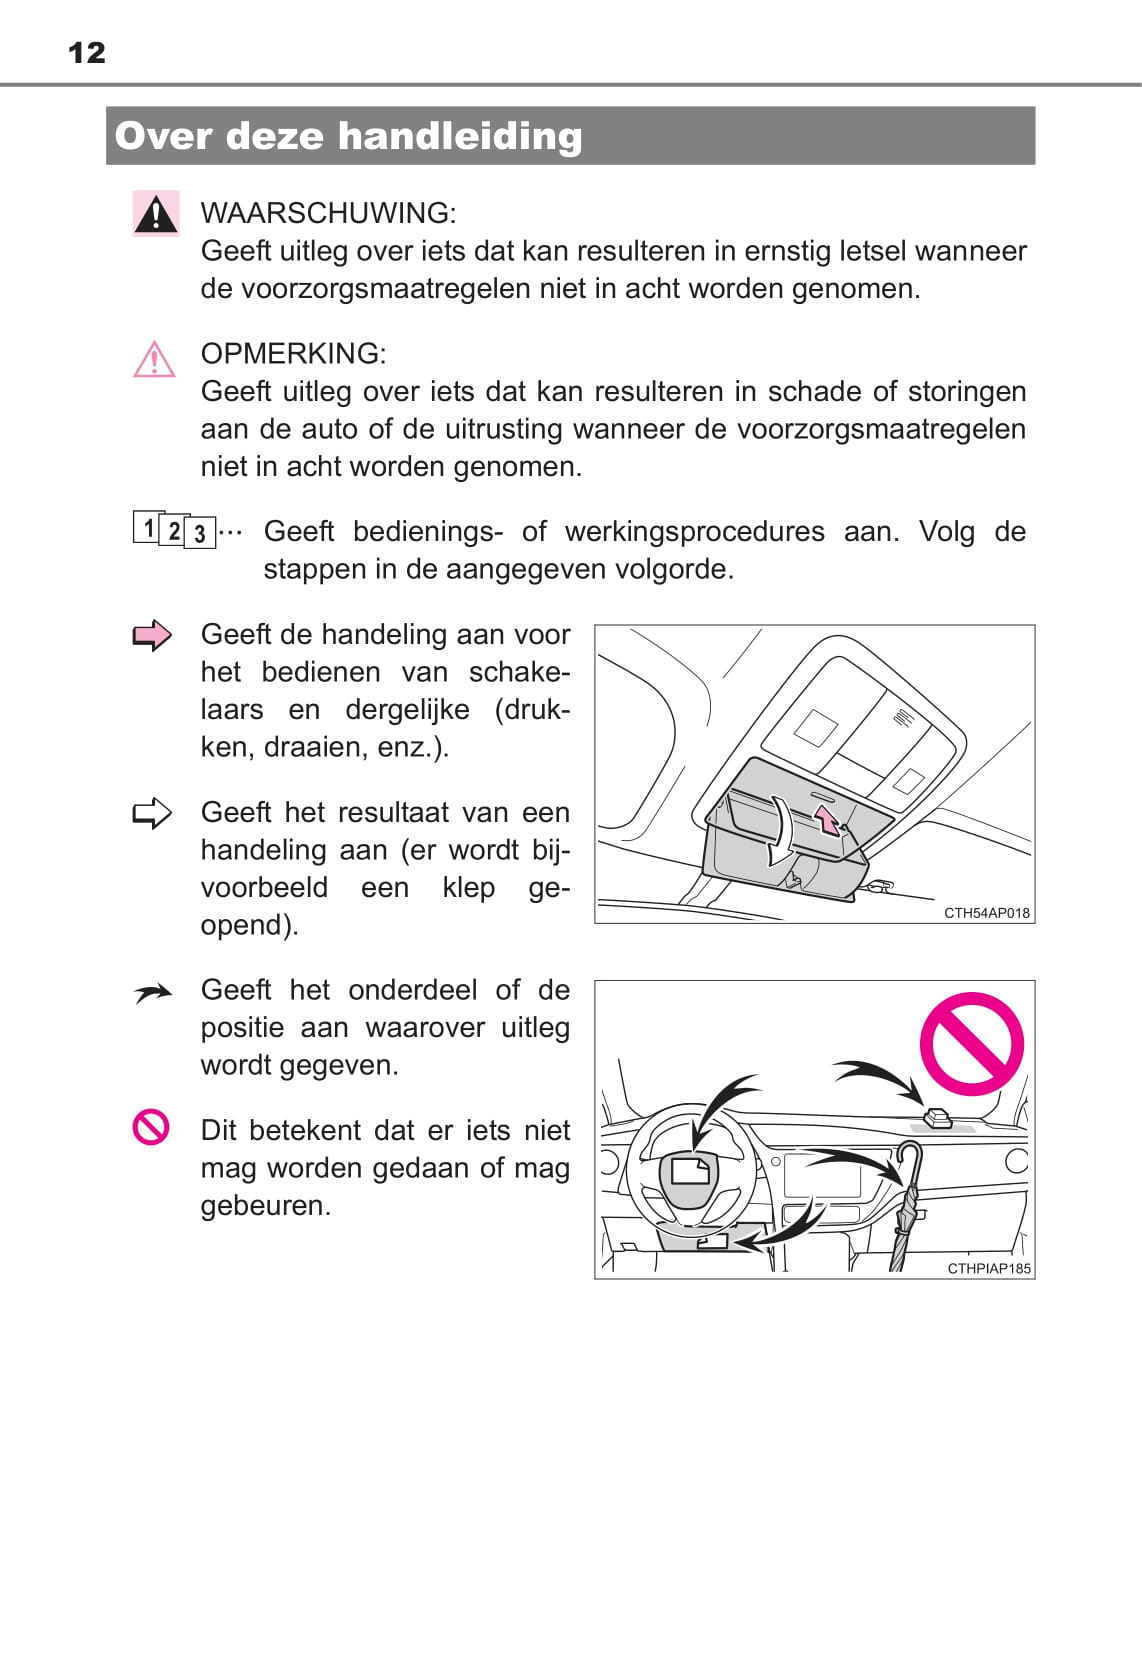 2016-2017 Toyota Auris Touring Sports Owner's Manual | Dutch